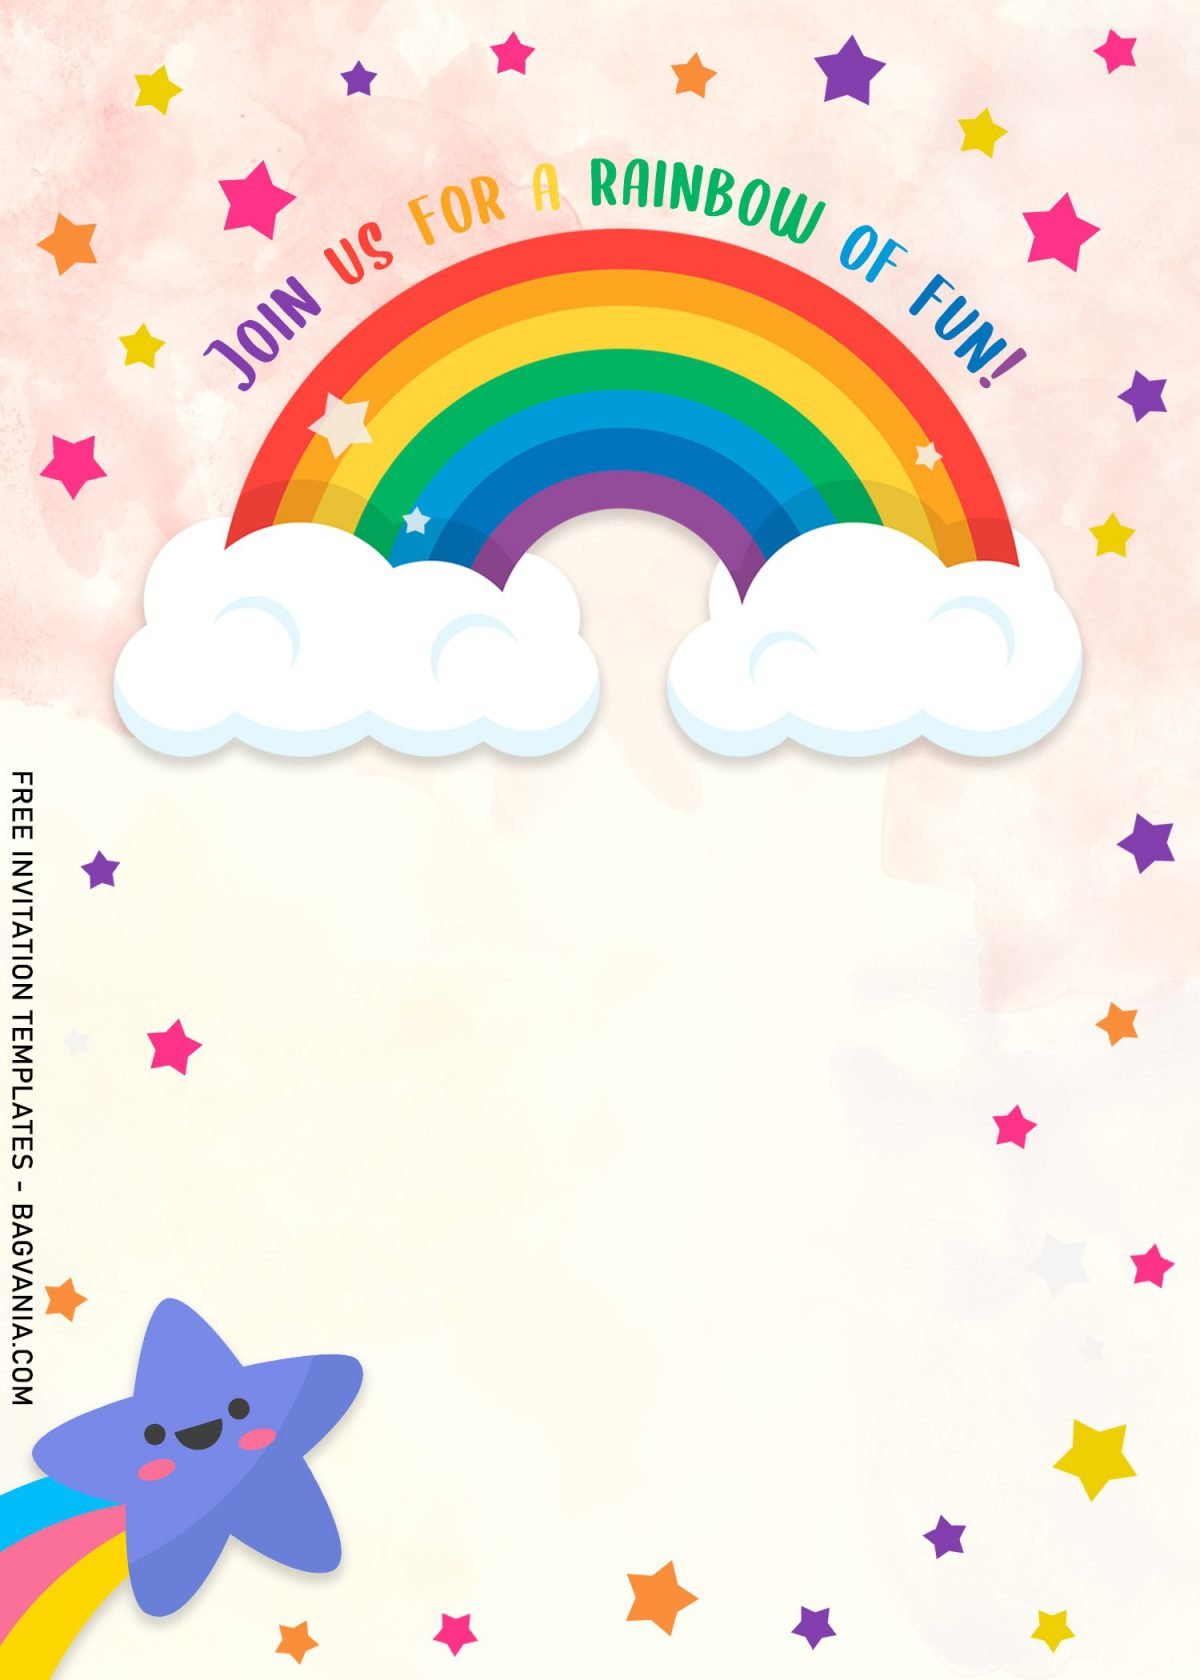 9+ Colorful Rainbow Invitation Card Templates For A Whimsical Birthday Party and has colorful stars